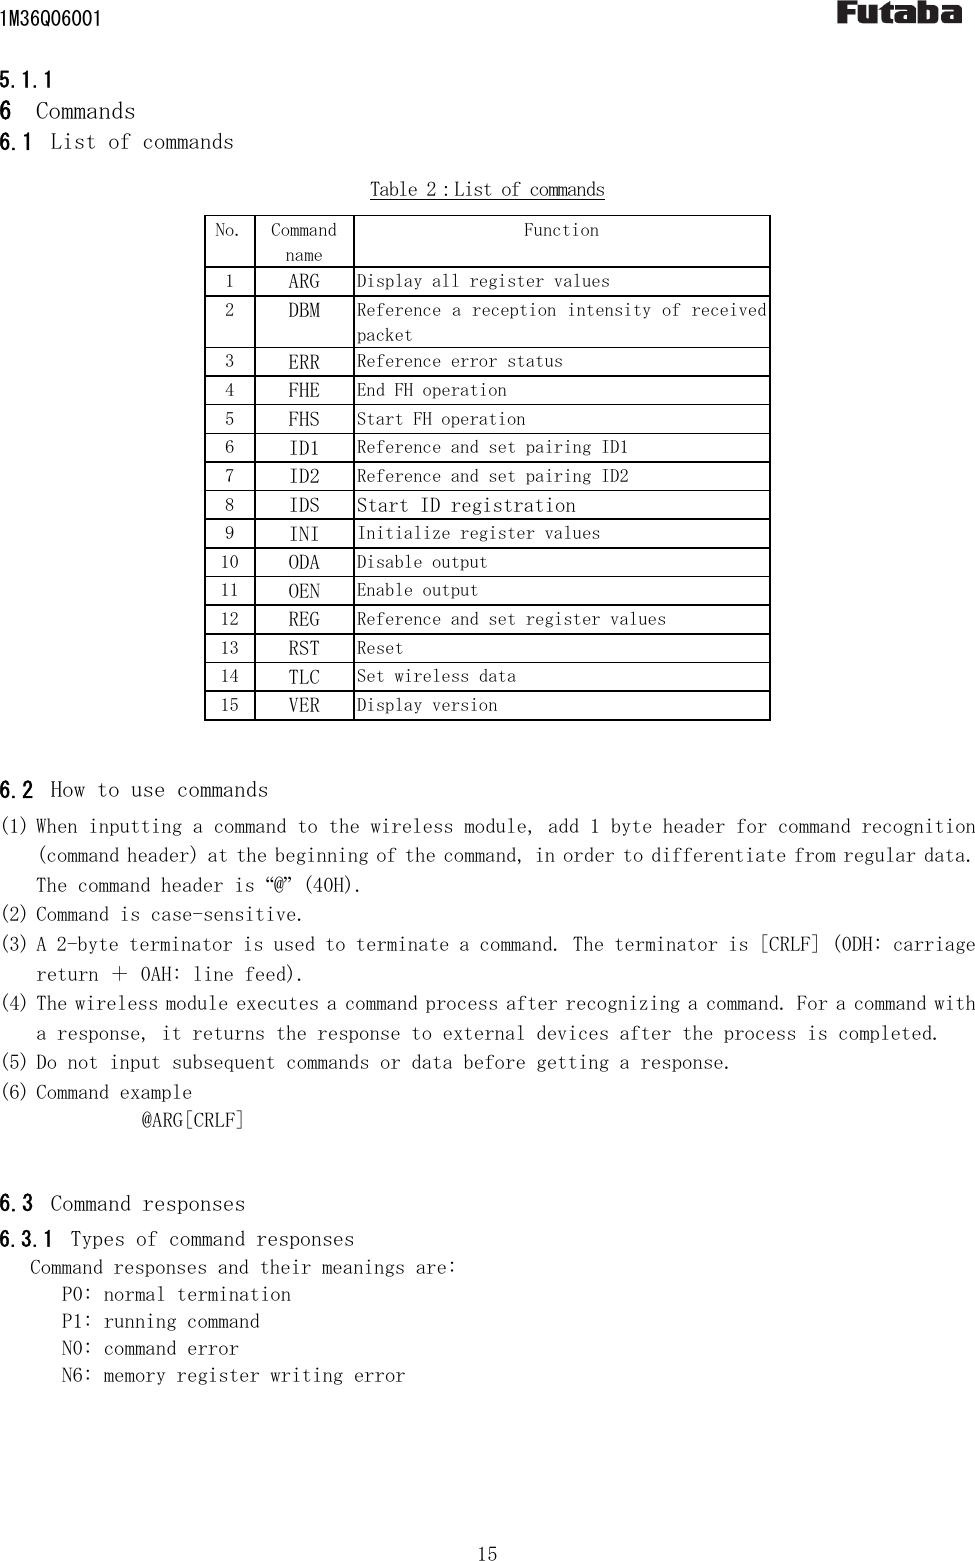 1M36Q06001 15 5.1.1   6  Commands 6.1  List of commands Table 2：List of commands No. Command name Function 1 ARG Display all register values 2 DBM Reference a reception intensity of received packet 3 ERR Reference error status 4 FHE End FH operation 5 FHS Start FH operation 6 ID1 Reference and set pairing ID1 7 ID2 Reference and set pairing ID2 8 IDS  Start ID registration 9 INI Initialize register values 10 ODA Disable output 11 OEN Enable output 12 REG Reference and set register values 13 RST Reset 14 TLC Set wireless data 15 VER Display version   6.2  How to use commands (1) When inputting a command to the wireless module, add 1 byte header for command recognition (command header) at the beginning of the command, in order to differentiate from regular data. The command header is “@” (40H). (2) Command is case-sensitive. (3) A 2-byte terminator is used to terminate a command. The terminator is [CRLF] (0DH: carriage return ＋ 0AH: line feed). (4) The wireless module executes a command process after recognizing a command. For a command with a response, it returns the response to external devices after the process is completed. (5) Do not input subsequent commands or data before getting a response. (6) Command example @ARG[CRLF]   6.3  Command responses 6.3.1  Types of command responses Command responses and their meanings are: P0: normal termination  P1: running command N0: command error N6: memory register writing error   